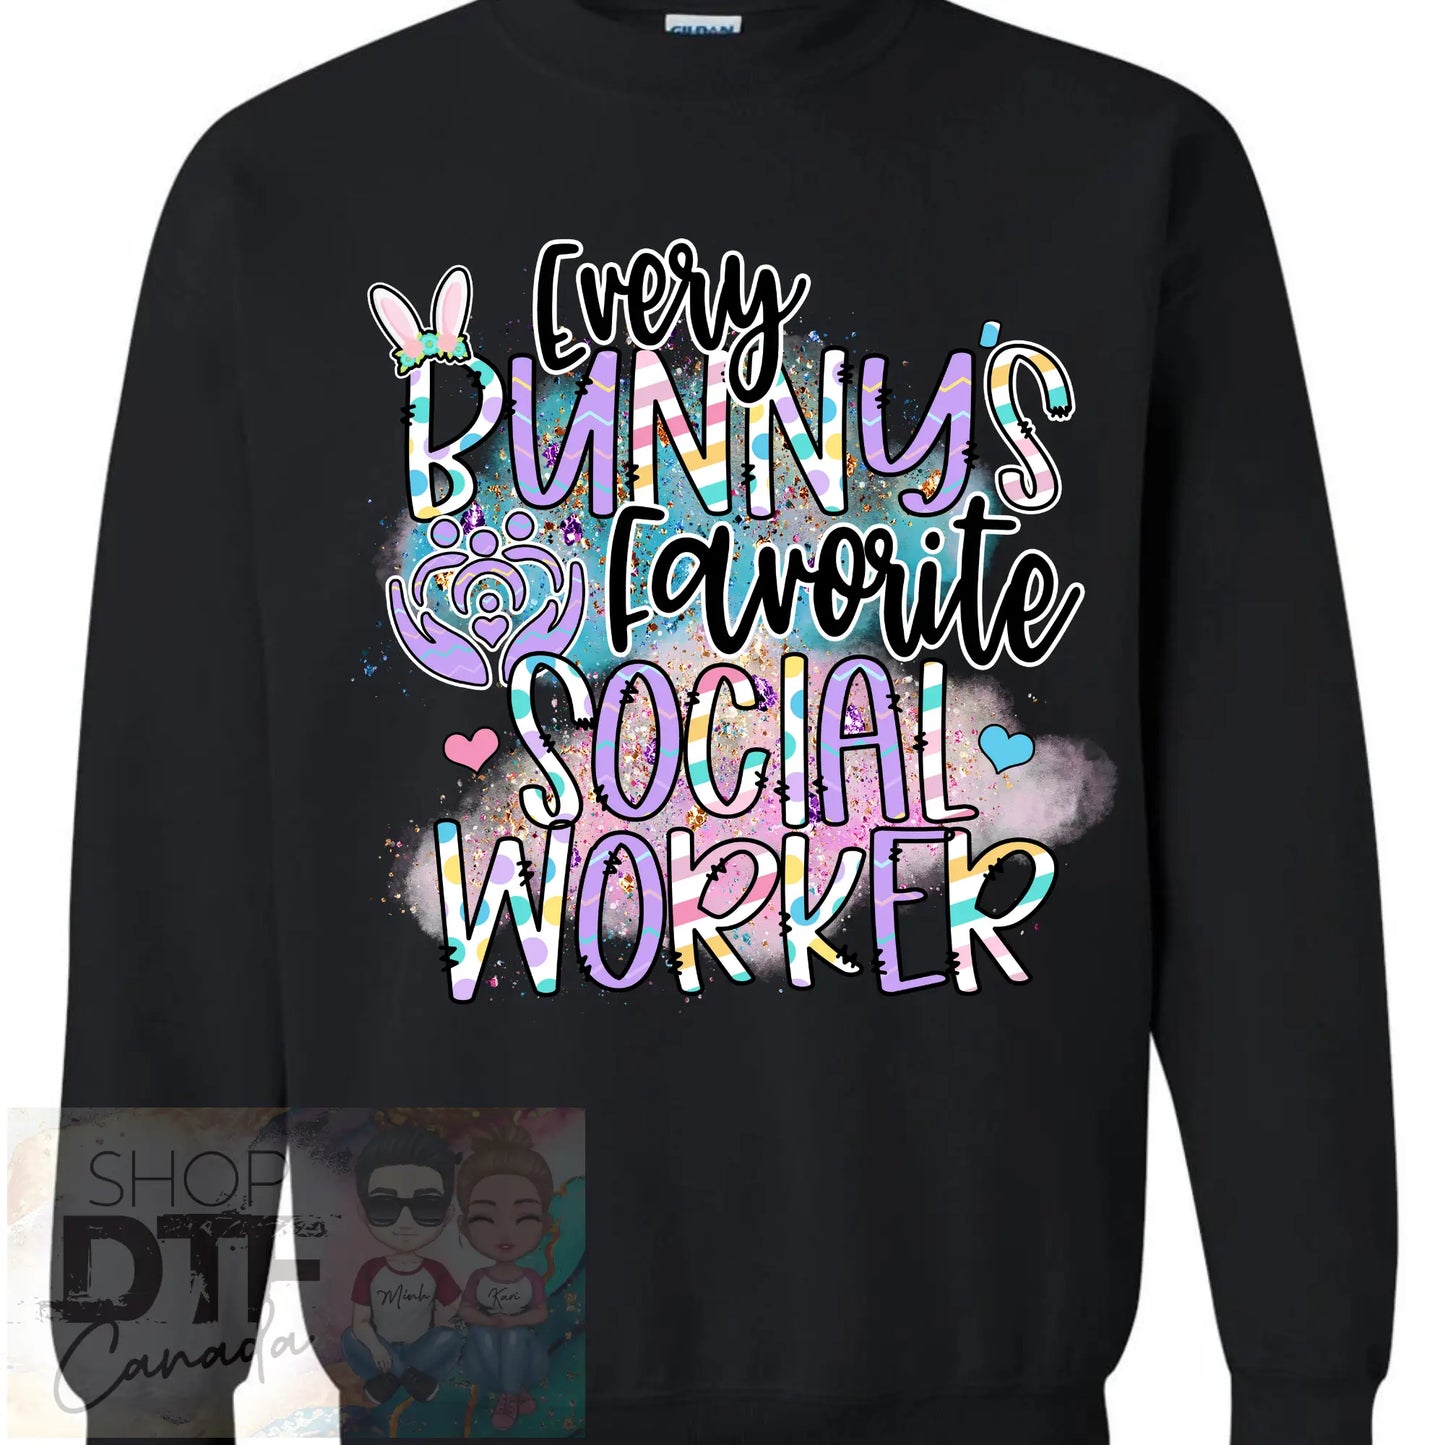 Job - Every Bunny’s Favorite Social Worker - Shirts & Tops